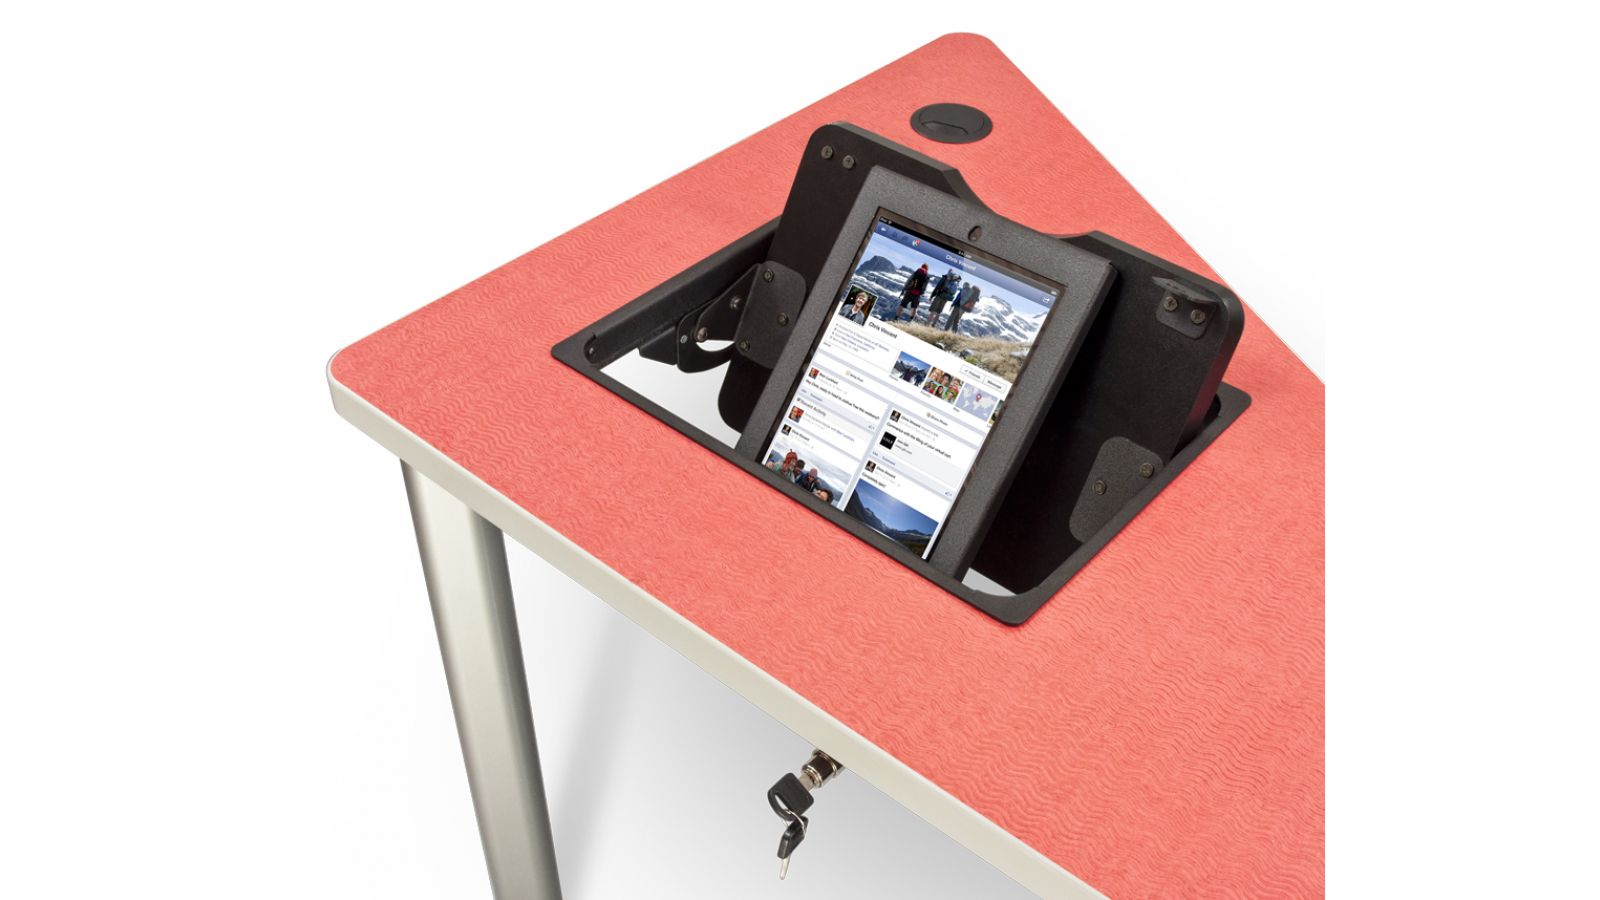 iPad flipIT shown in iGroup Collaboration Table